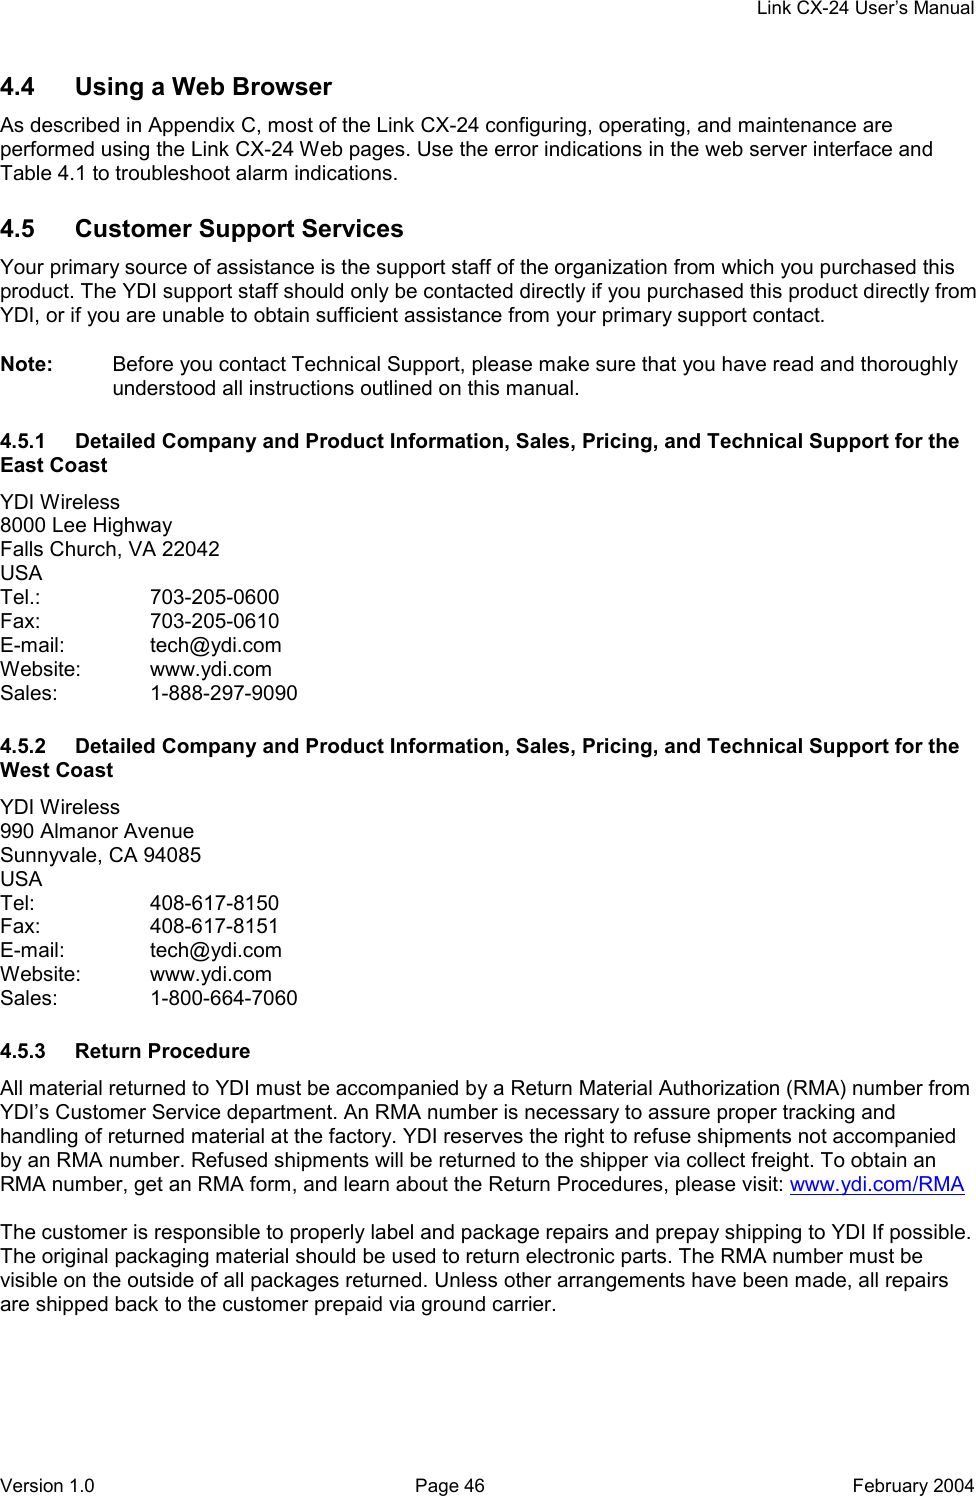     Link CX-24 User’s Manual Version 1.0  Page 46  February 2004 4.4  Using a Web Browser As described in Appendix C, most of the Link CX-24 configuring, operating, and maintenance are performed using the Link CX-24 Web pages. Use the error indications in the web server interface and Table 4.1 to troubleshoot alarm indications. 4.5  Customer Support Services Your primary source of assistance is the support staff of the organization from which you purchased this product. The YDI support staff should only be contacted directly if you purchased this product directly from YDI, or if you are unable to obtain sufficient assistance from your primary support contact. Note:  Before you contact Technical Support, please make sure that you have read and thoroughly understood all instructions outlined on this manual. 4.5.1  Detailed Company and Product Information, Sales, Pricing, and Technical Support for the East Coast YDI Wireless 8000 Lee Highway Falls Church, VA 22042 USA Tel.:   703-205-0600 Fax:   703-205-0610 E-mail: tech@ydi.com Website: www.ydi.com Sales: 1-888-297-9090 4.5.2  Detailed Company and Product Information, Sales, Pricing, and Technical Support for the West Coast YDI Wireless 990 Almanor Avenue Sunnyvale, CA 94085 USA Tel: 408-617-8150 Fax: 408-617-8151 E-mail: tech@ydi.com Website: www.ydi.com Sales: 1-800-664-7060 4.5.3 Return Procedure All material returned to YDI must be accompanied by a Return Material Authorization (RMA) number from YDI’s Customer Service department. An RMA number is necessary to assure proper tracking and handling of returned material at the factory. YDI reserves the right to refuse shipments not accompanied by an RMA number. Refused shipments will be returned to the shipper via collect freight. To obtain an RMA number, get an RMA form, and learn about the Return Procedures, please visit: www.ydi.com/RMA  The customer is responsible to properly label and package repairs and prepay shipping to YDI If possible. The original packaging material should be used to return electronic parts. The RMA number must be visible on the outside of all packages returned. Unless other arrangements have been made, all repairs are shipped back to the customer prepaid via ground carrier. 